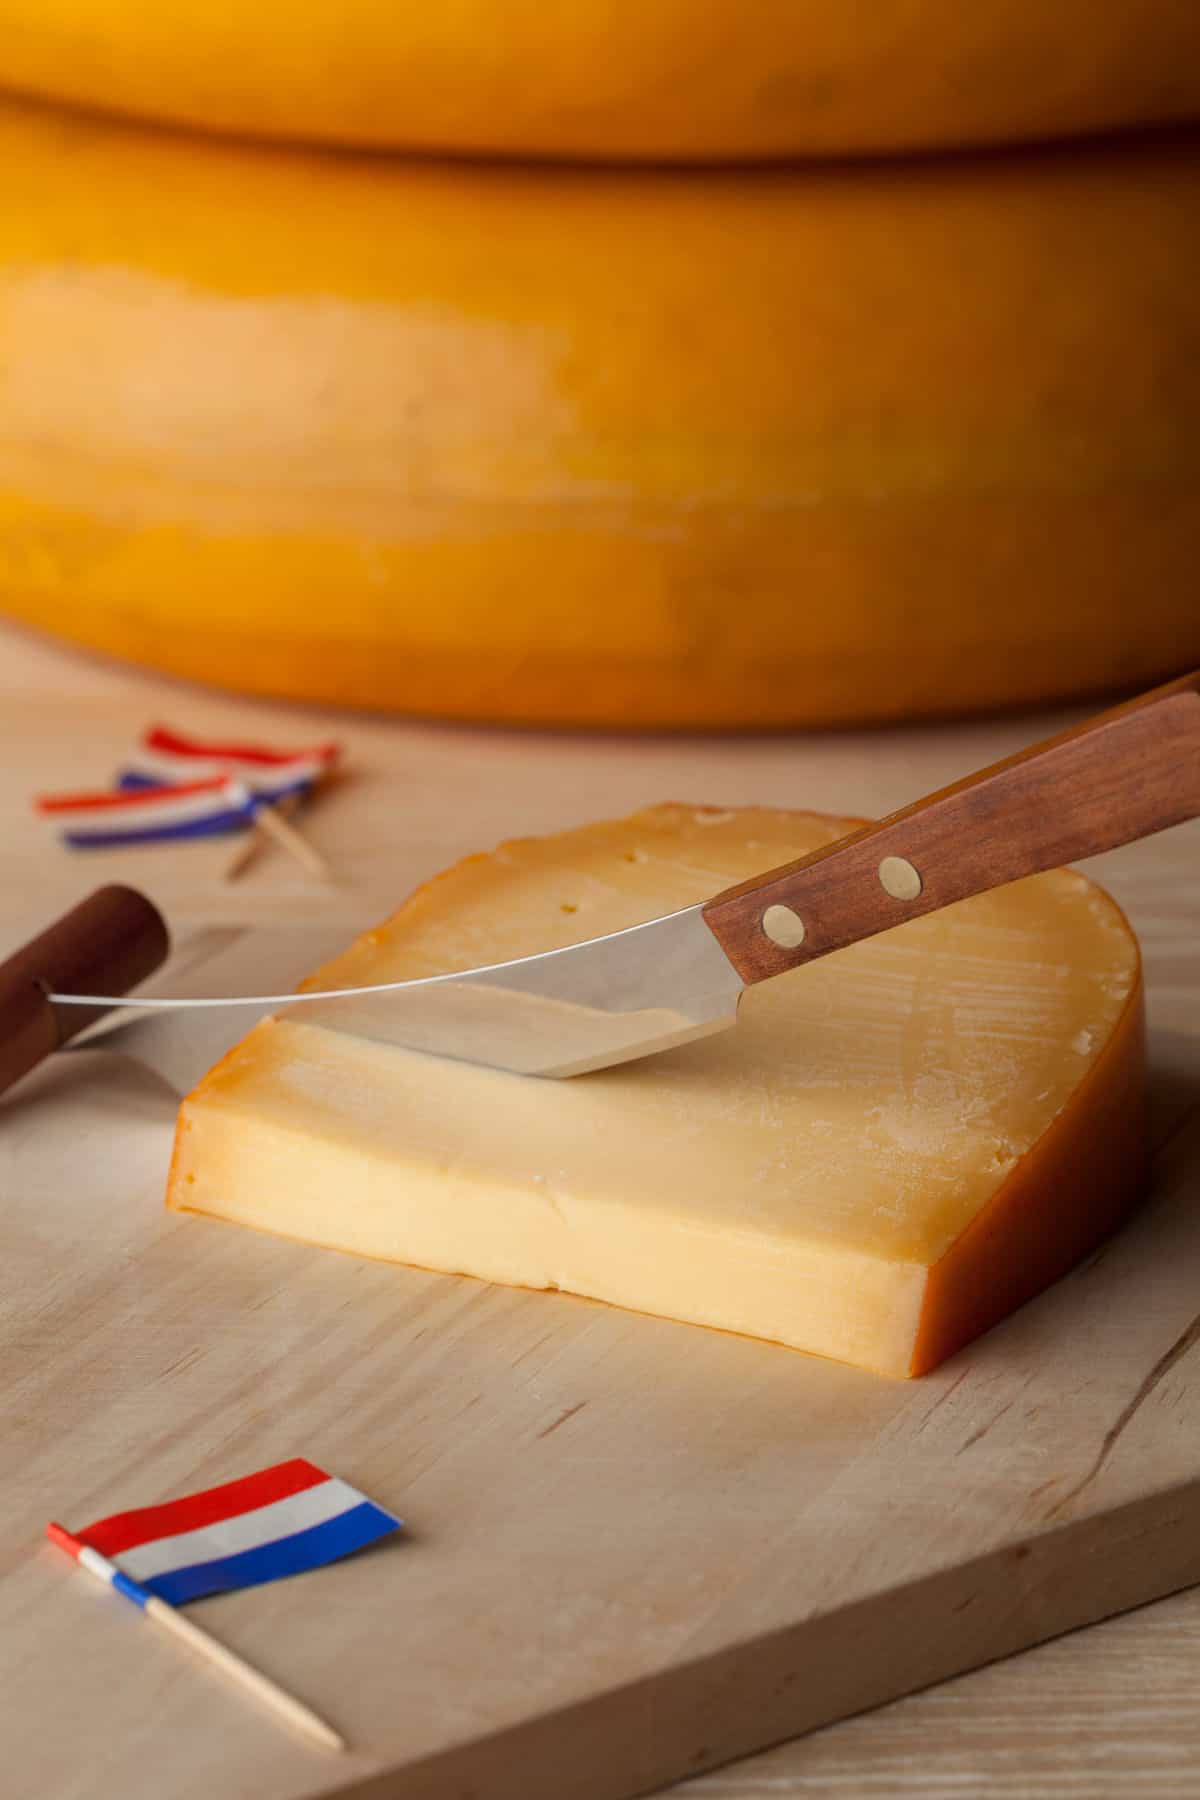 Gouda cheese wedge on cutting board with knife and Netherlands flag.